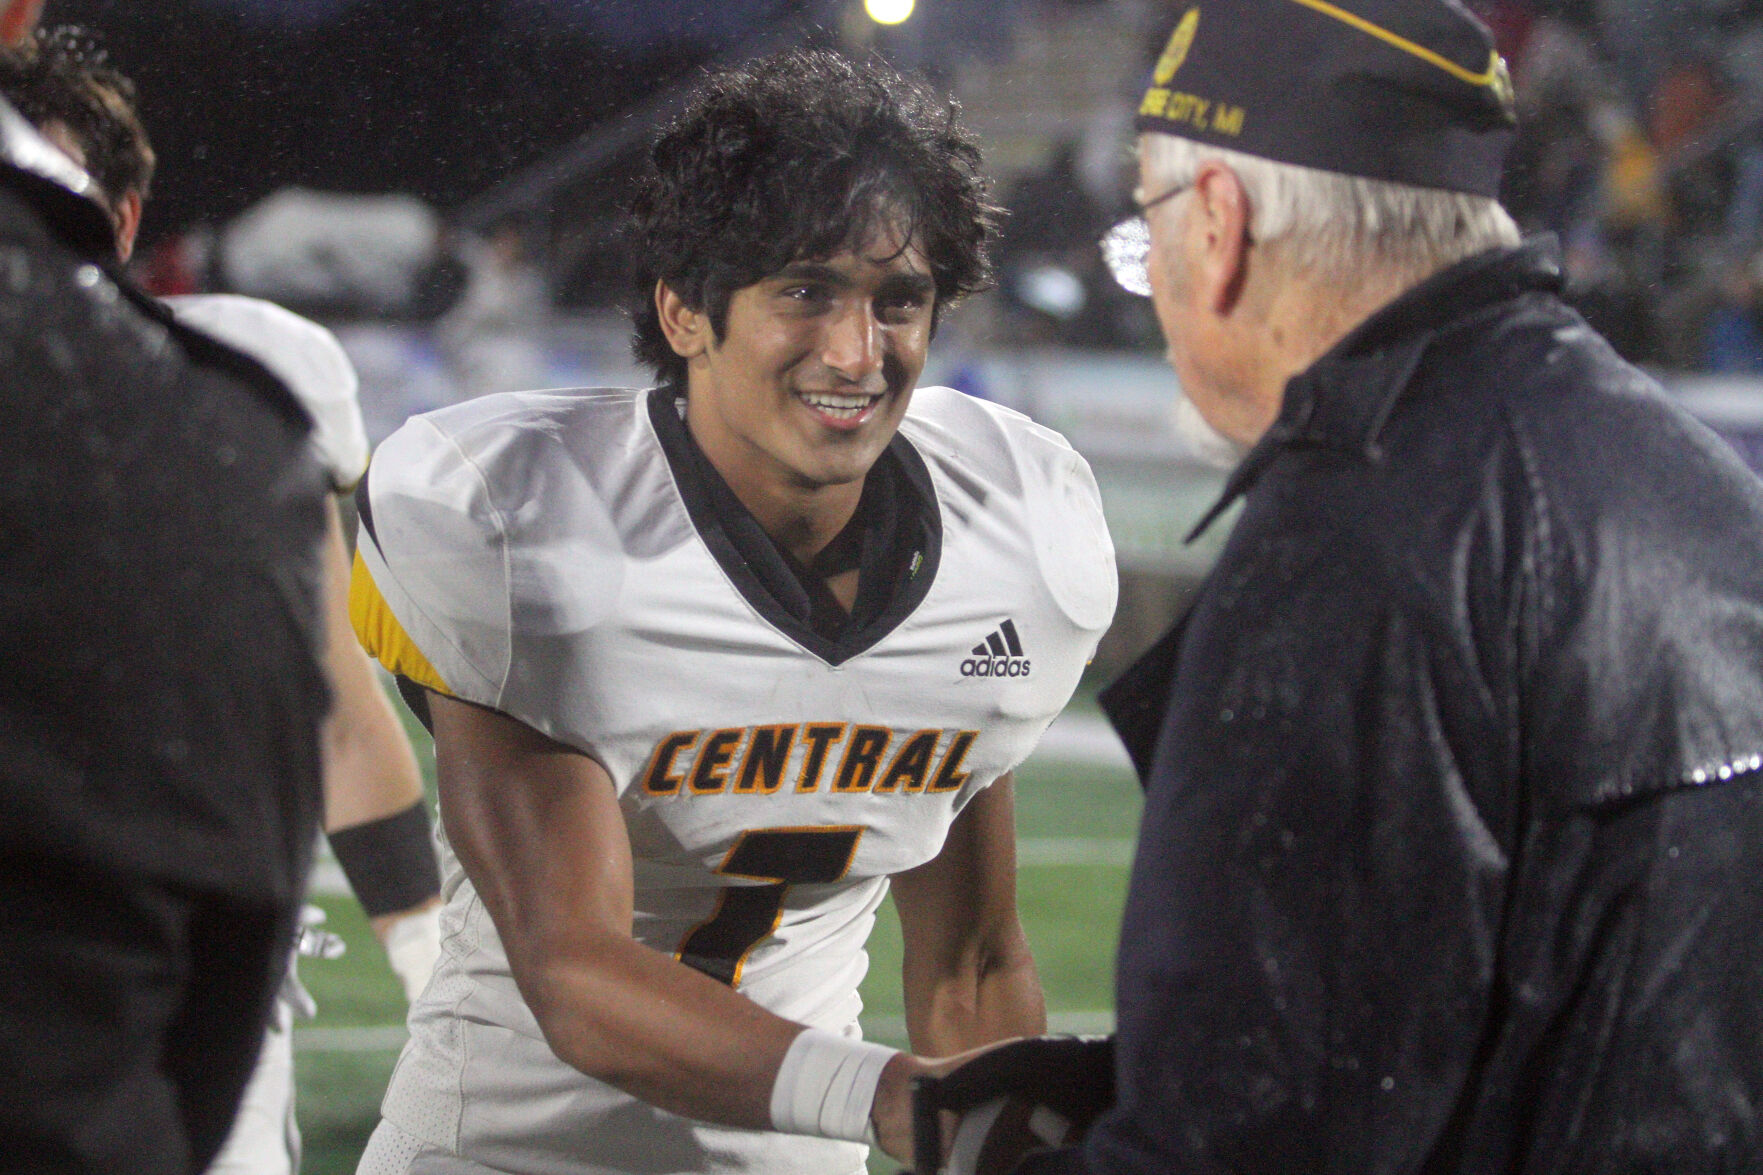 Traverse City Central loses 17-8 to Traverse West in TC Patriot Game, clings to playoff hopes